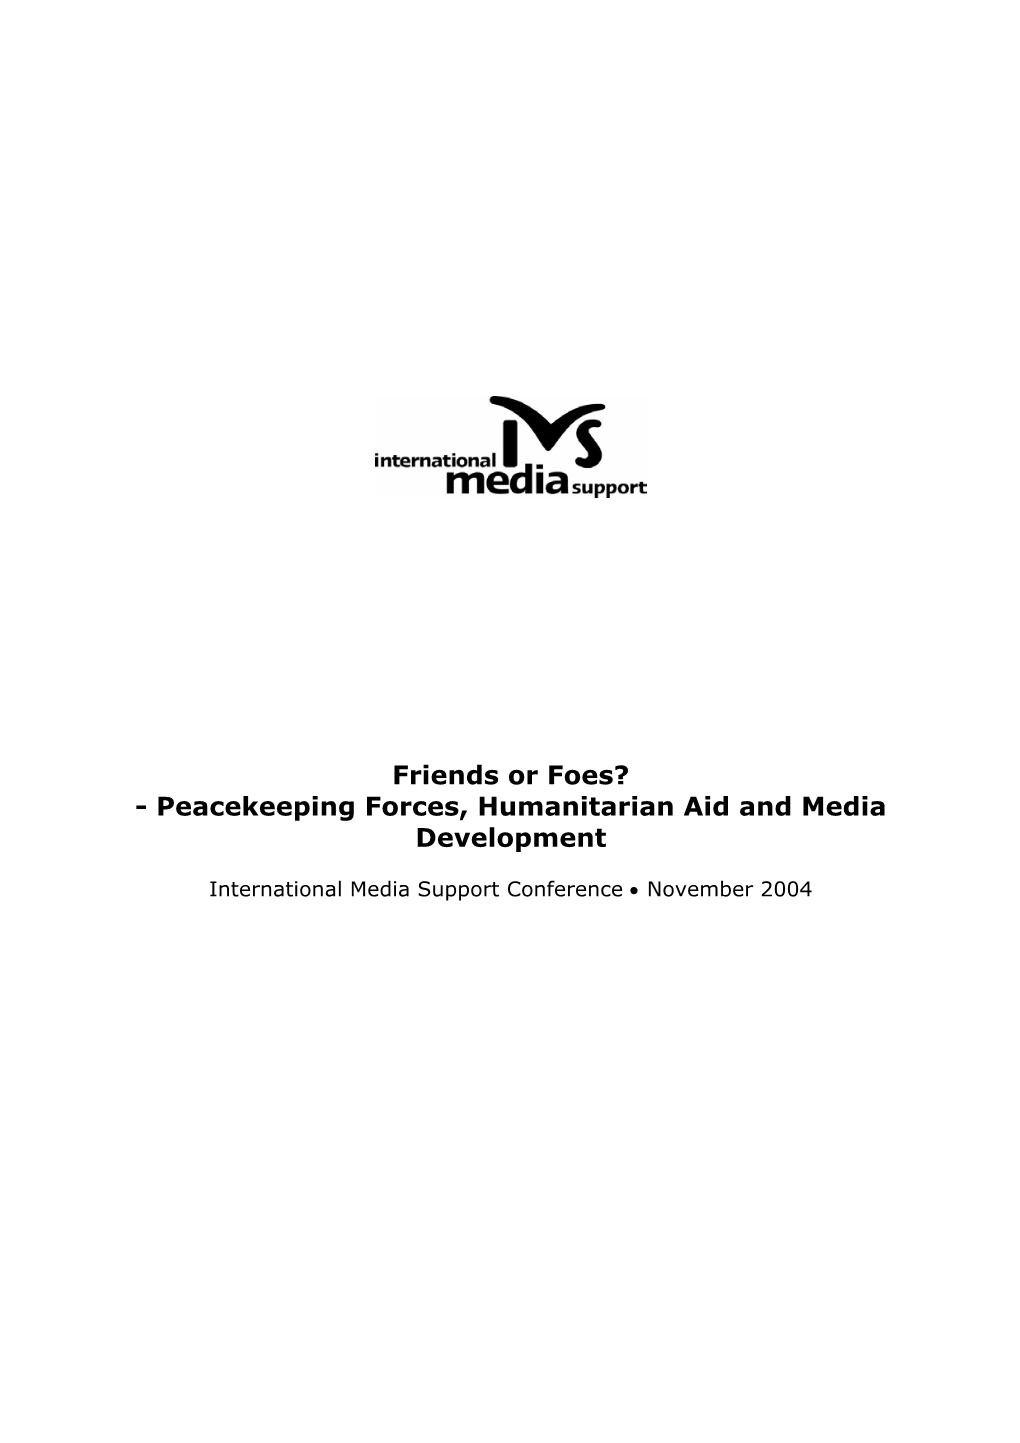 Friends Or Foes? - Peacekeeping Forces, Humanitarian Aid and Media Development